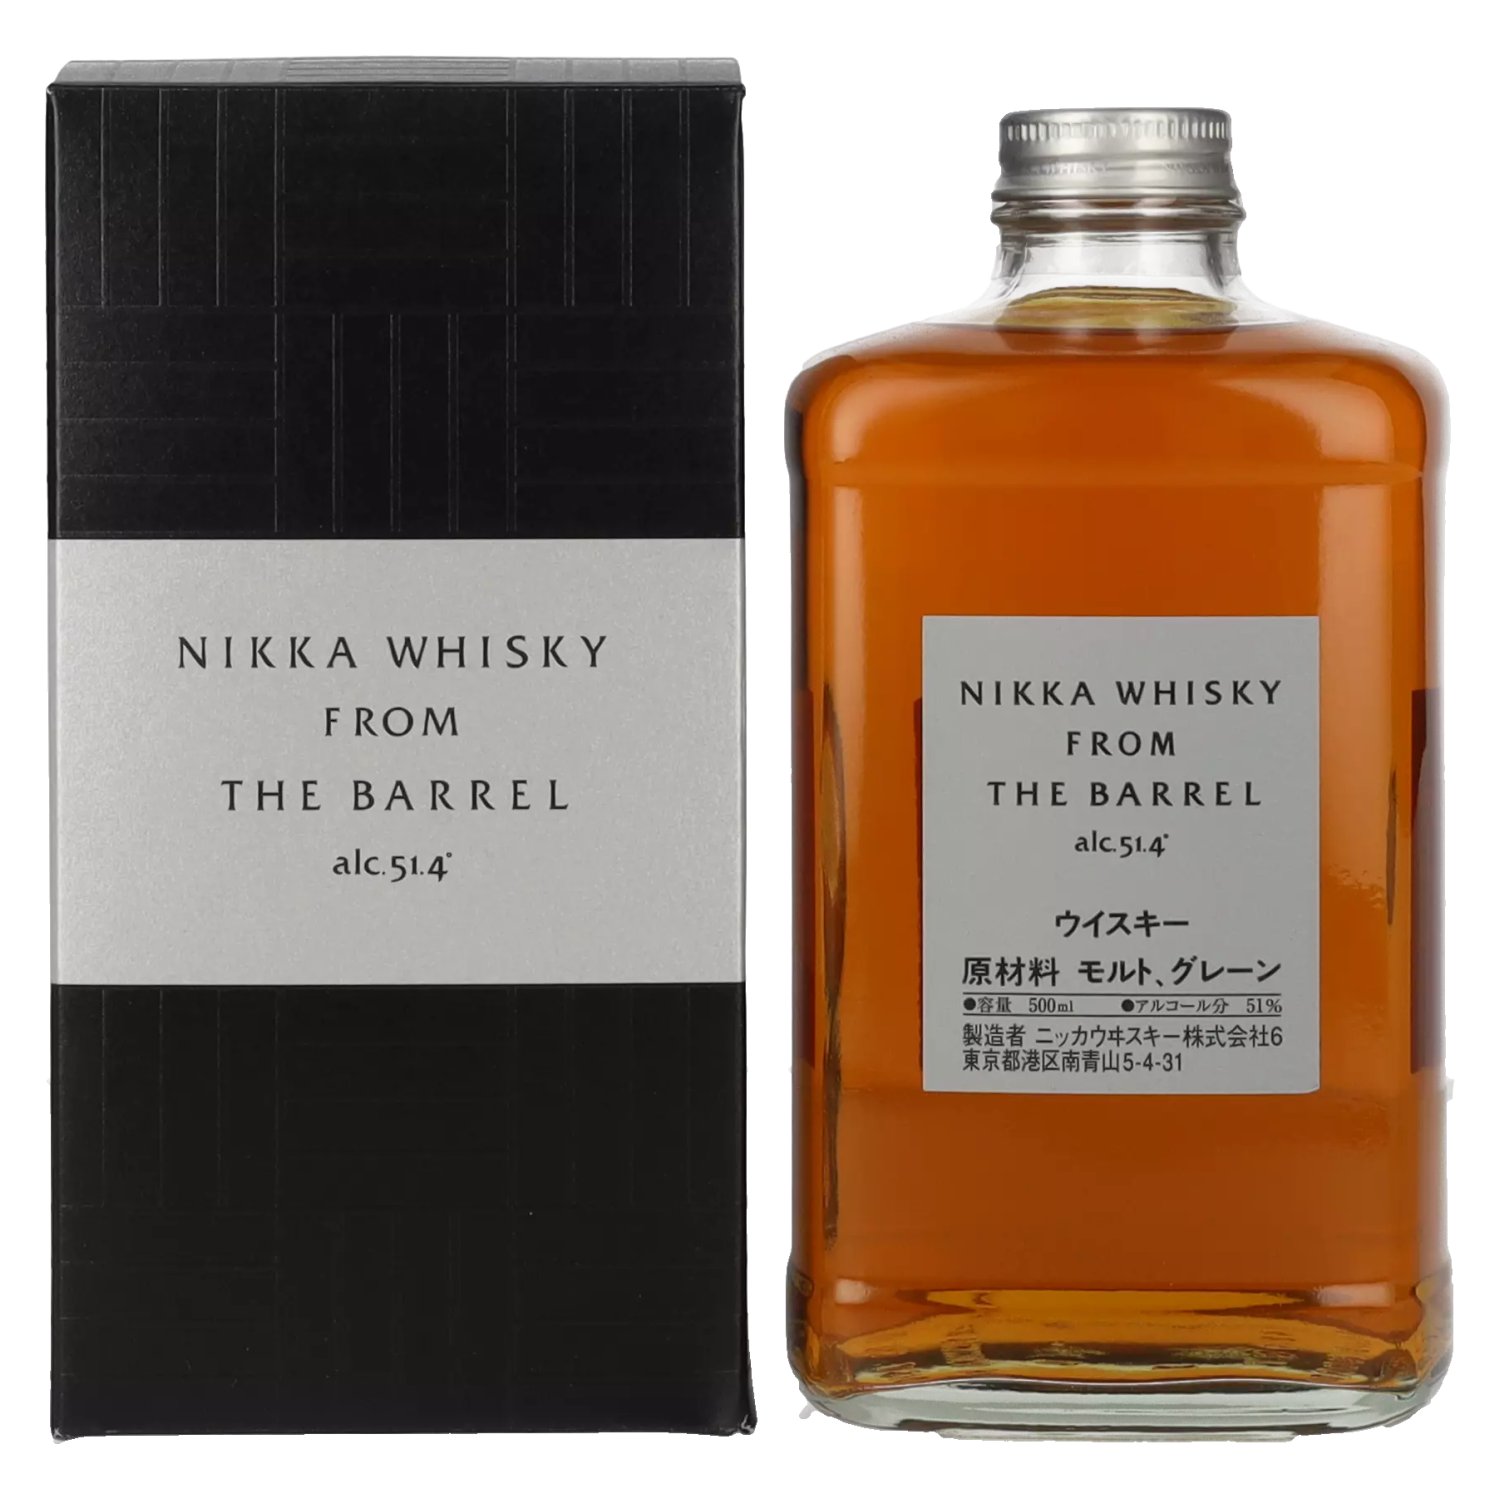 Whisky Nikka in 0,5l Geschenkbox Double Vol. Barrel the 51,4% Matured Blended From